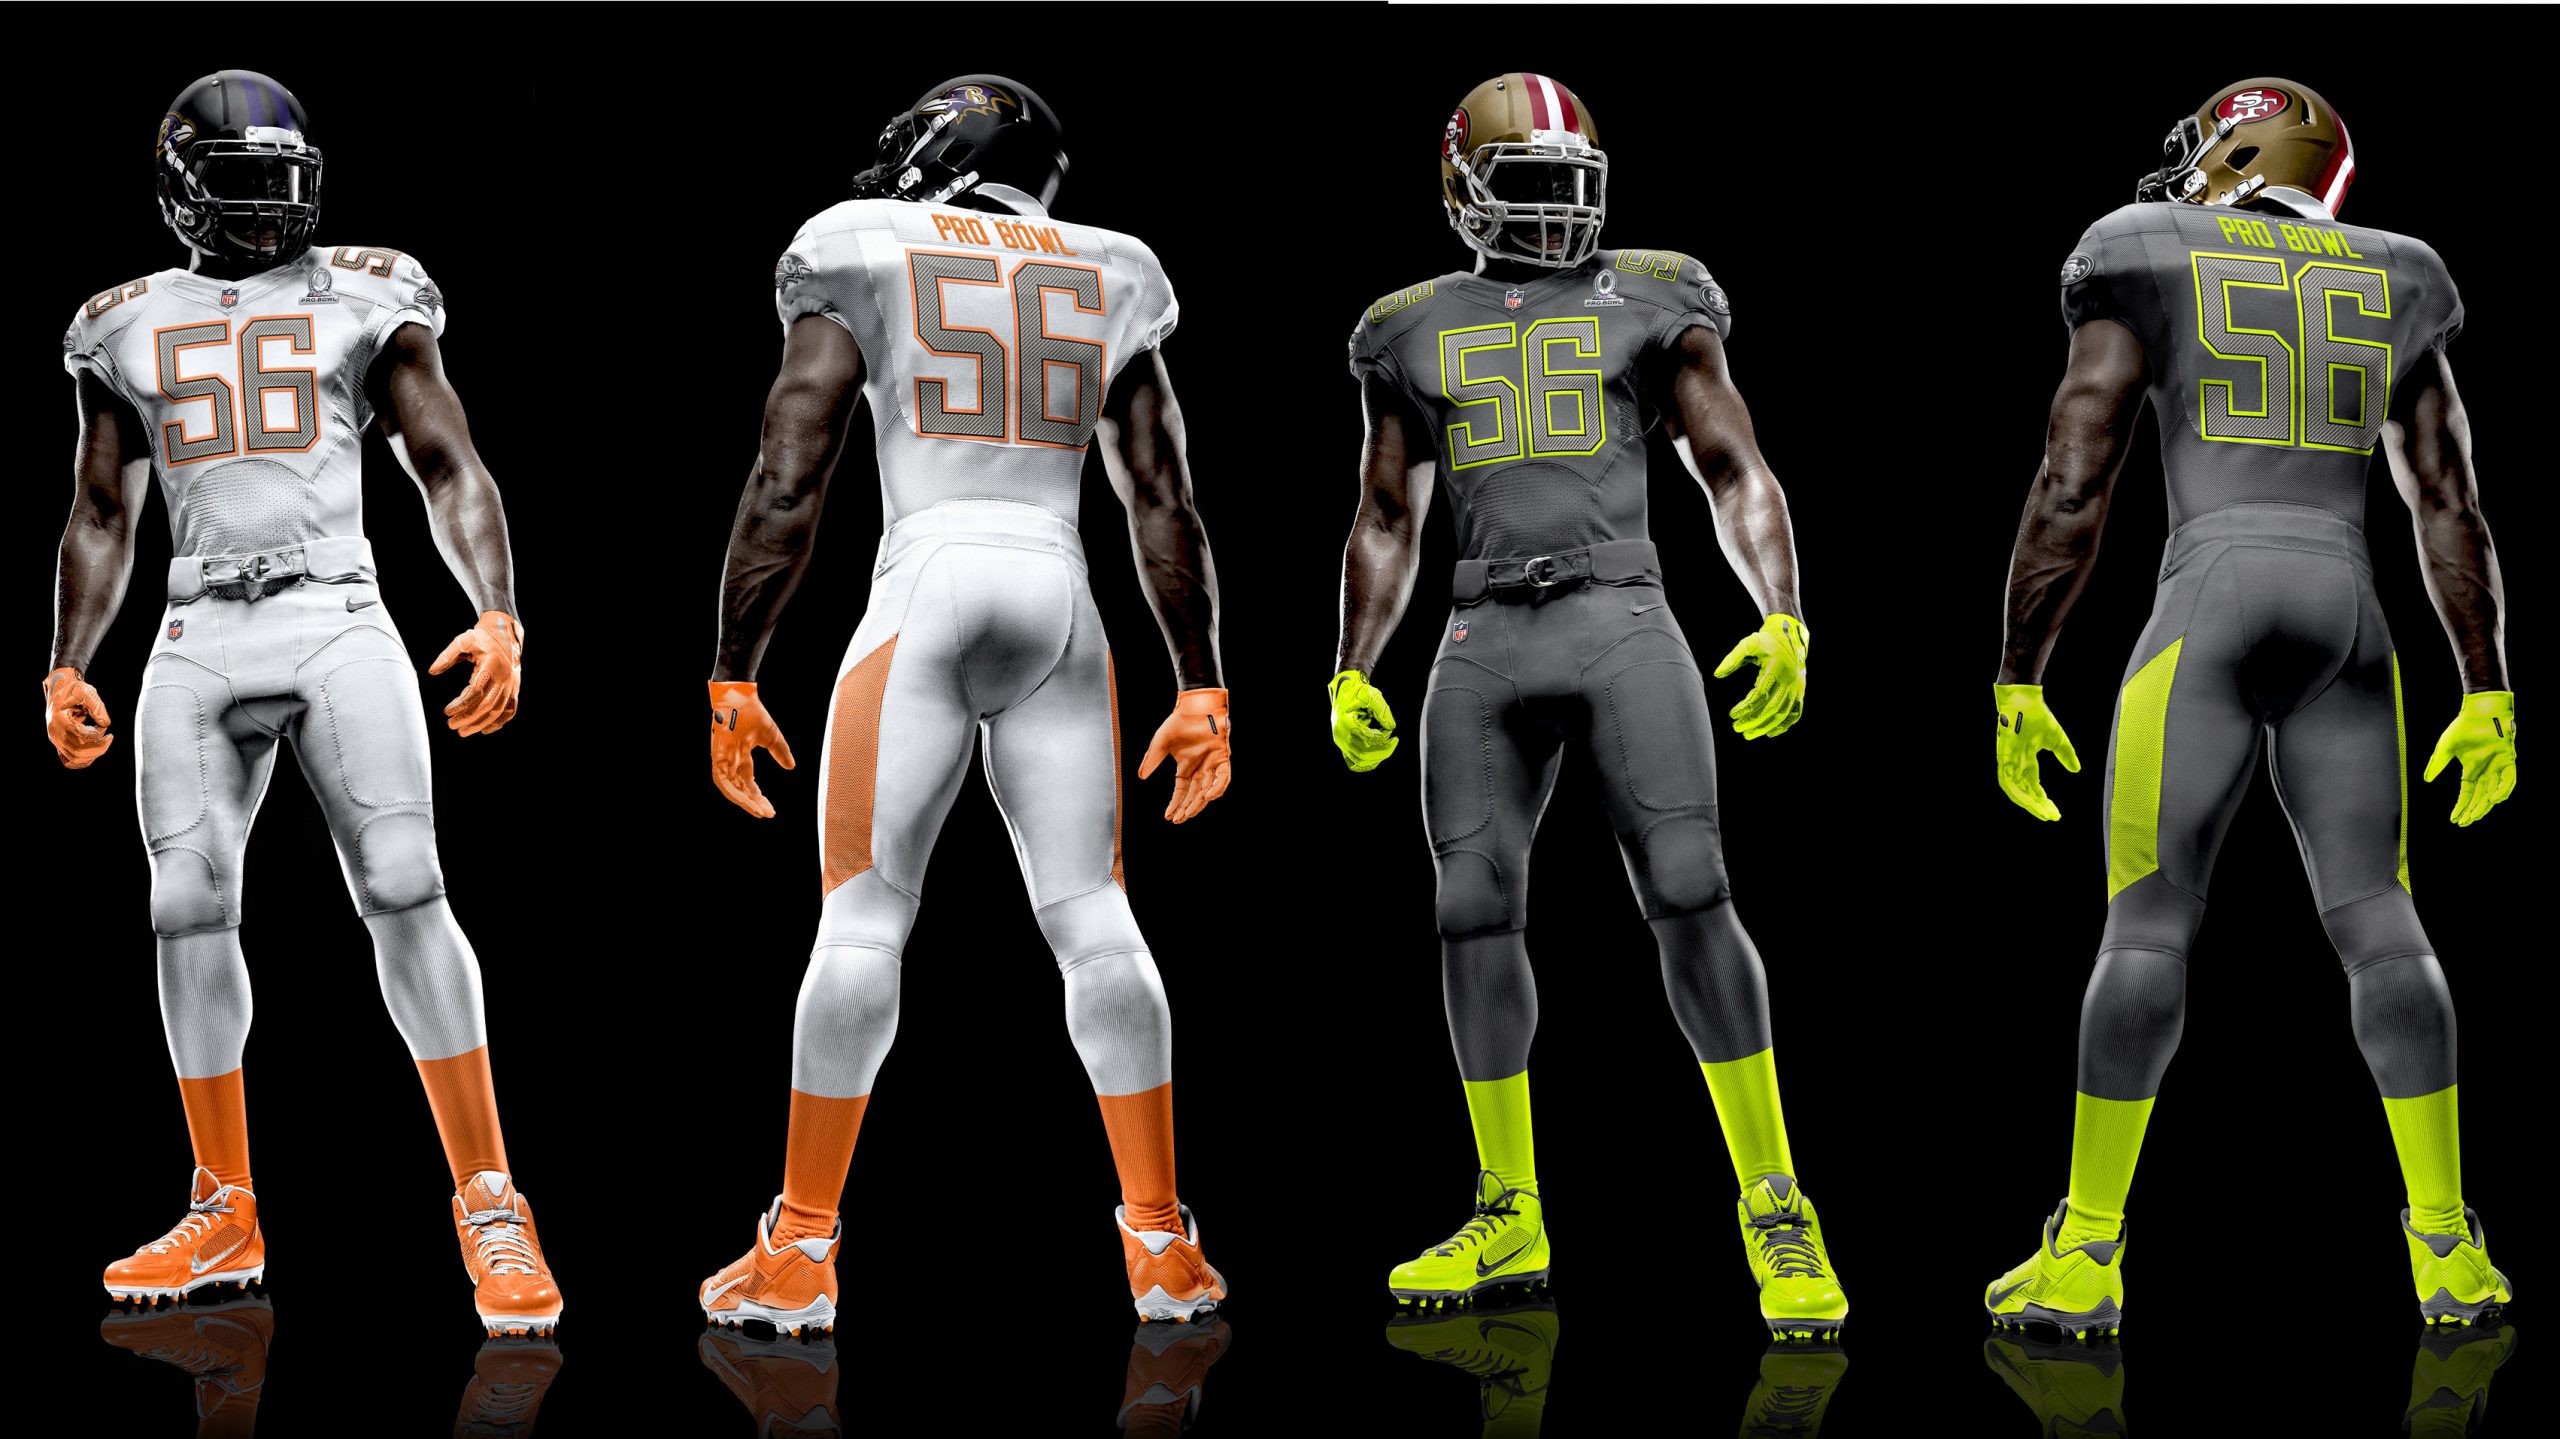 NFL goes next-gen with new Pro Bowl uniforms